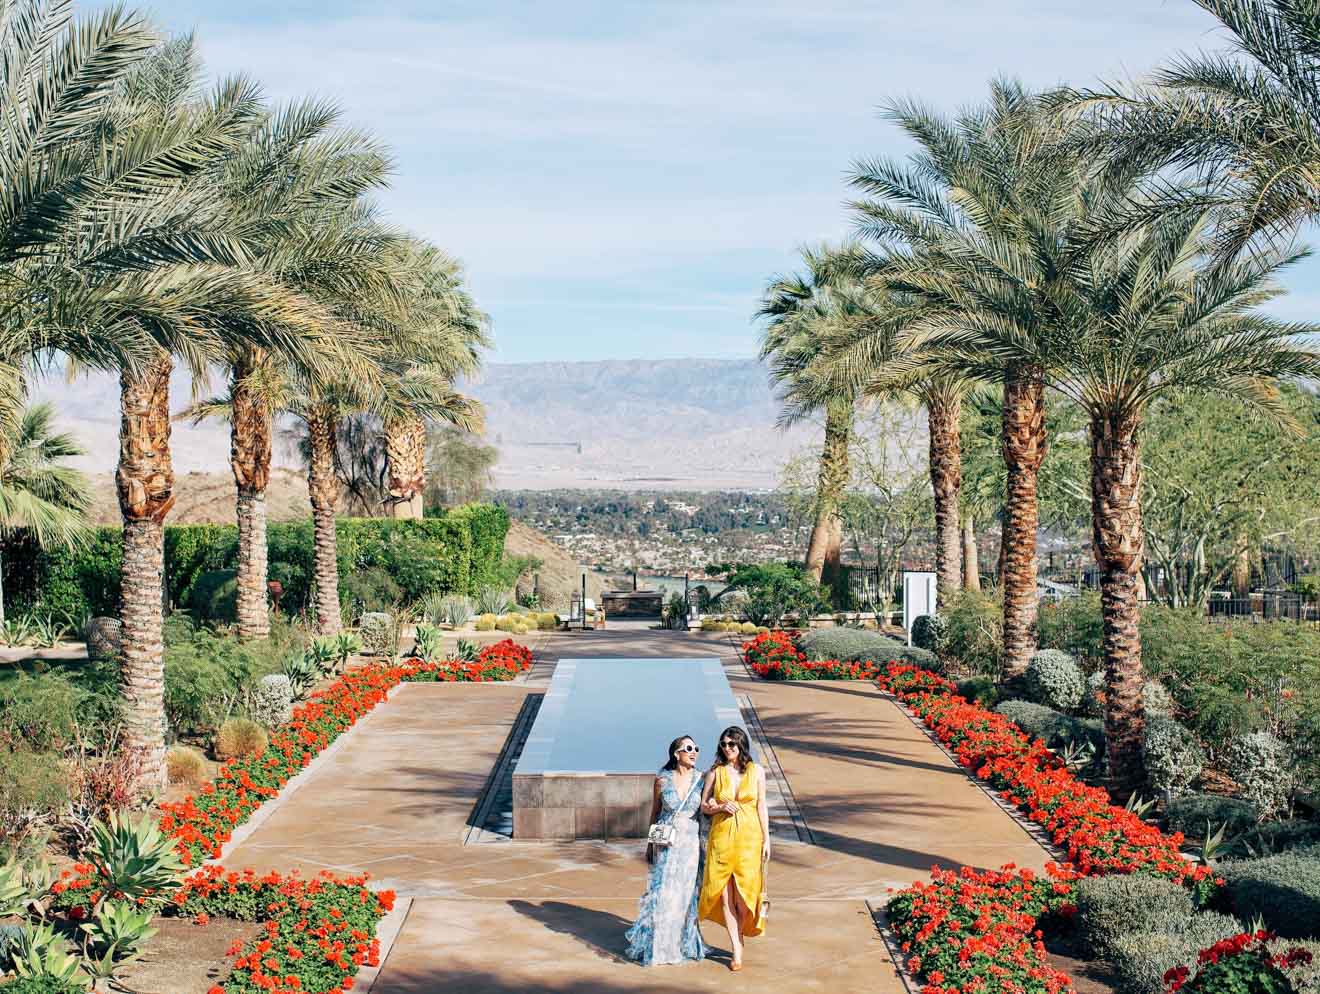 The Ritz-Carlton Rancho Mirage, Laura Lily Fashion Travel and Lifestyle Blog, Best Hotels in Palm Desert, - The Ritz-Carlton, Rancho Mirage Review by popular San Diego travel blogger Laura Lily